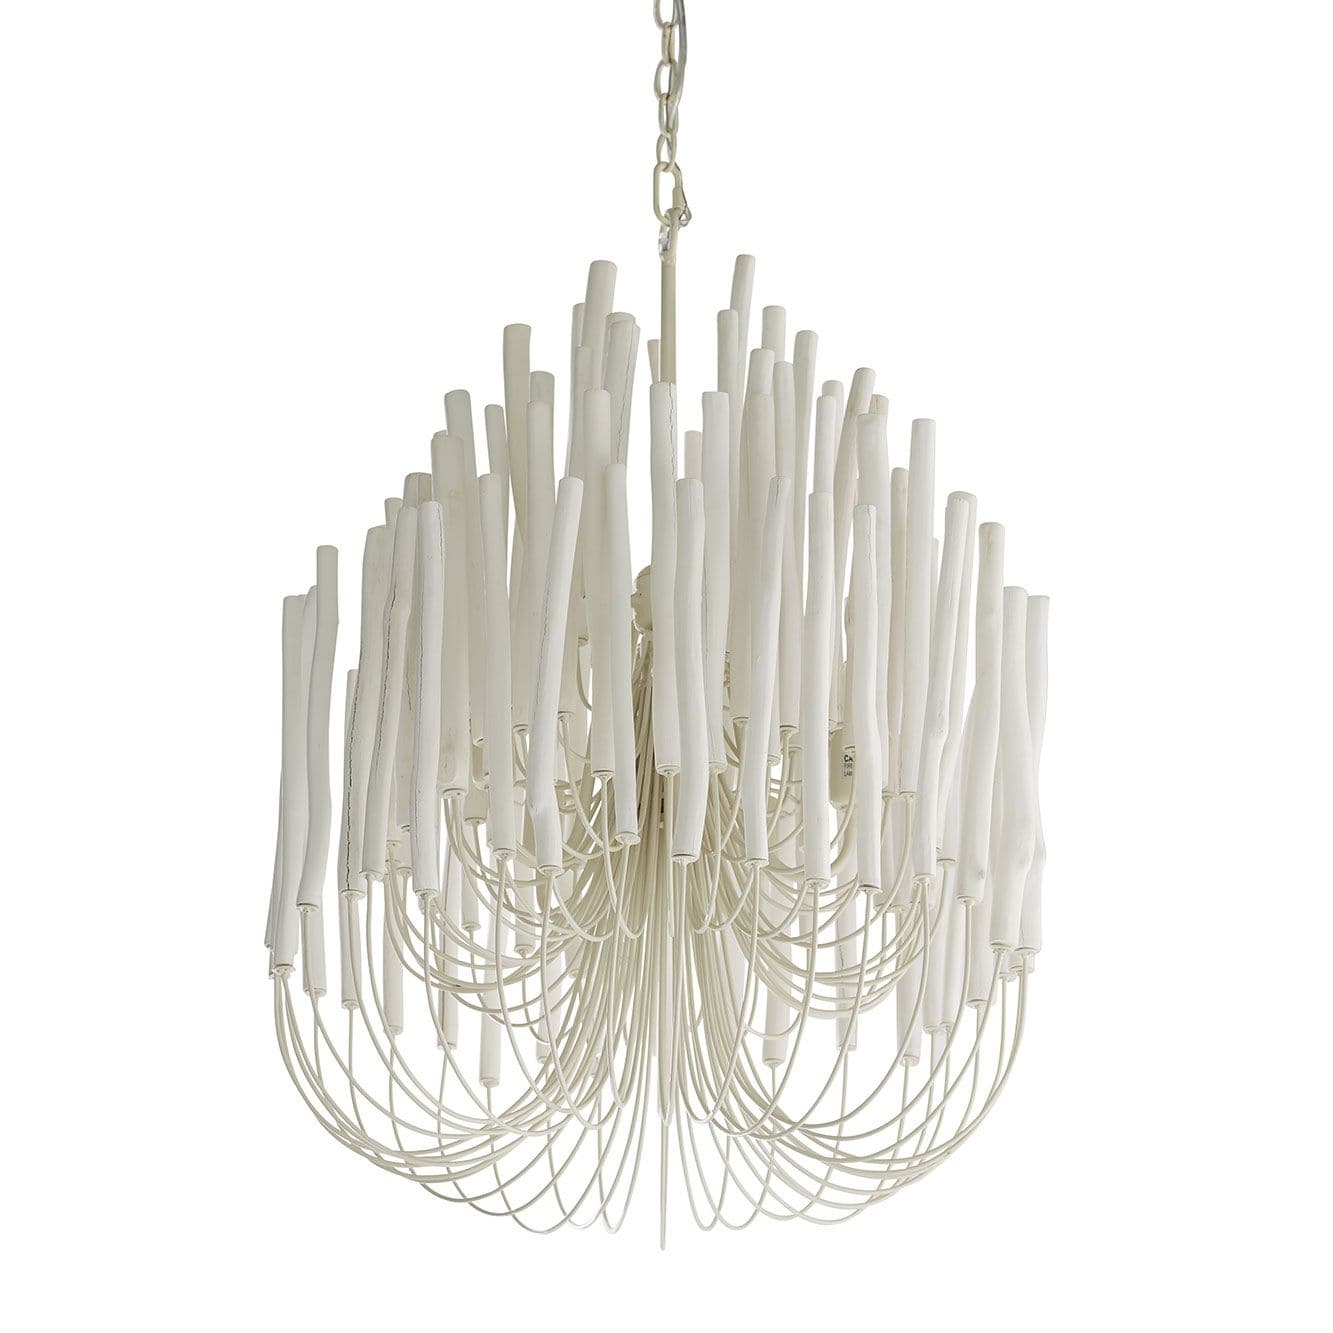 TILDA SMALL CHANDELIER in Whitewashed Wood finish